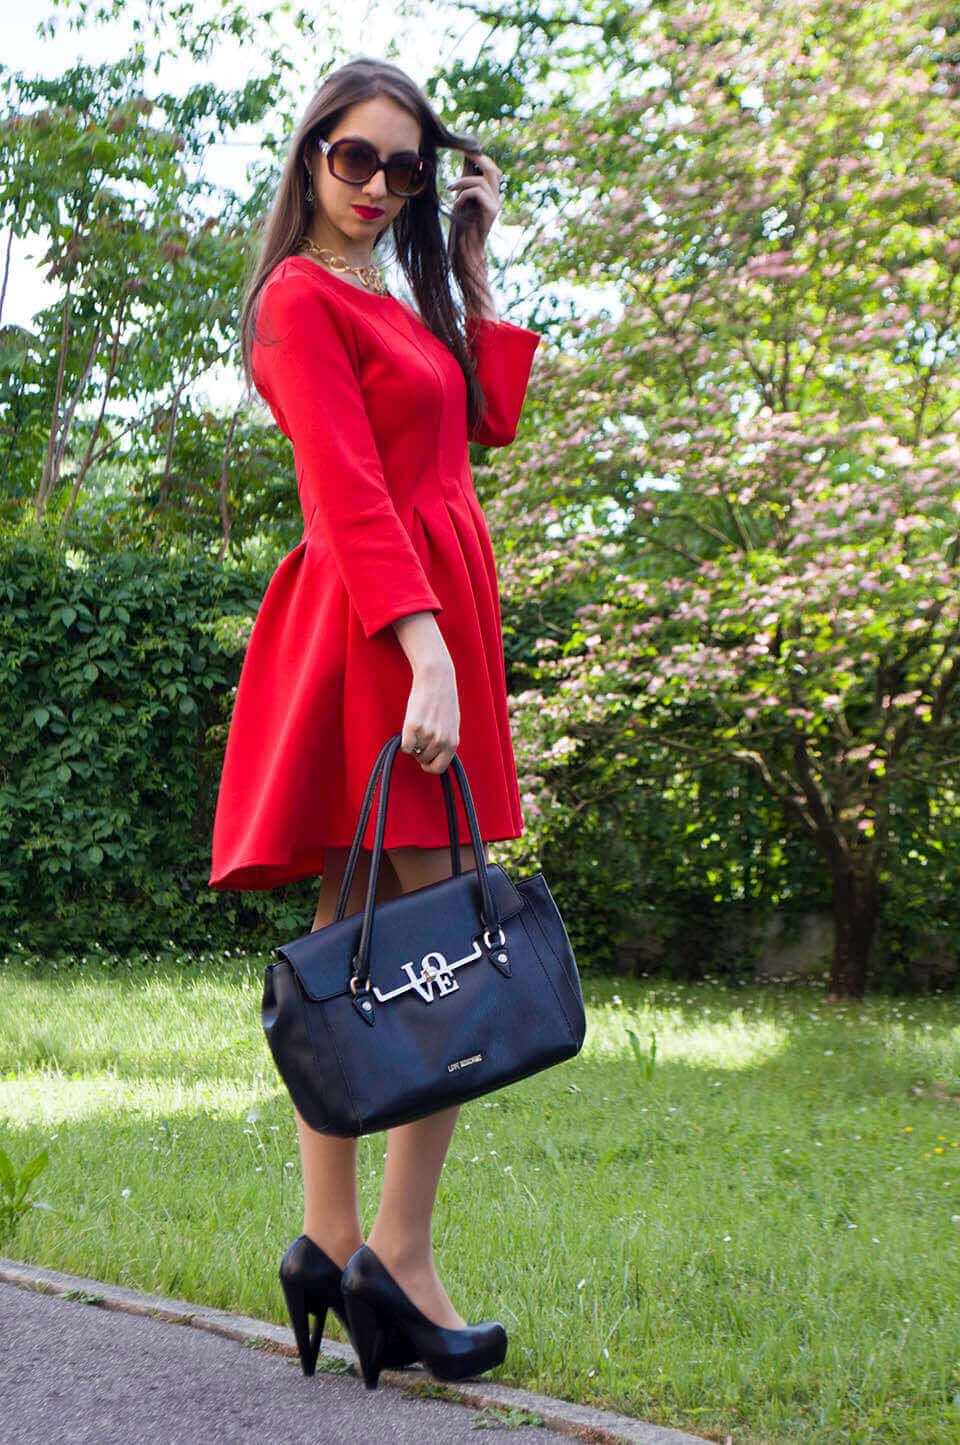 Red dress - Stylewe outfit